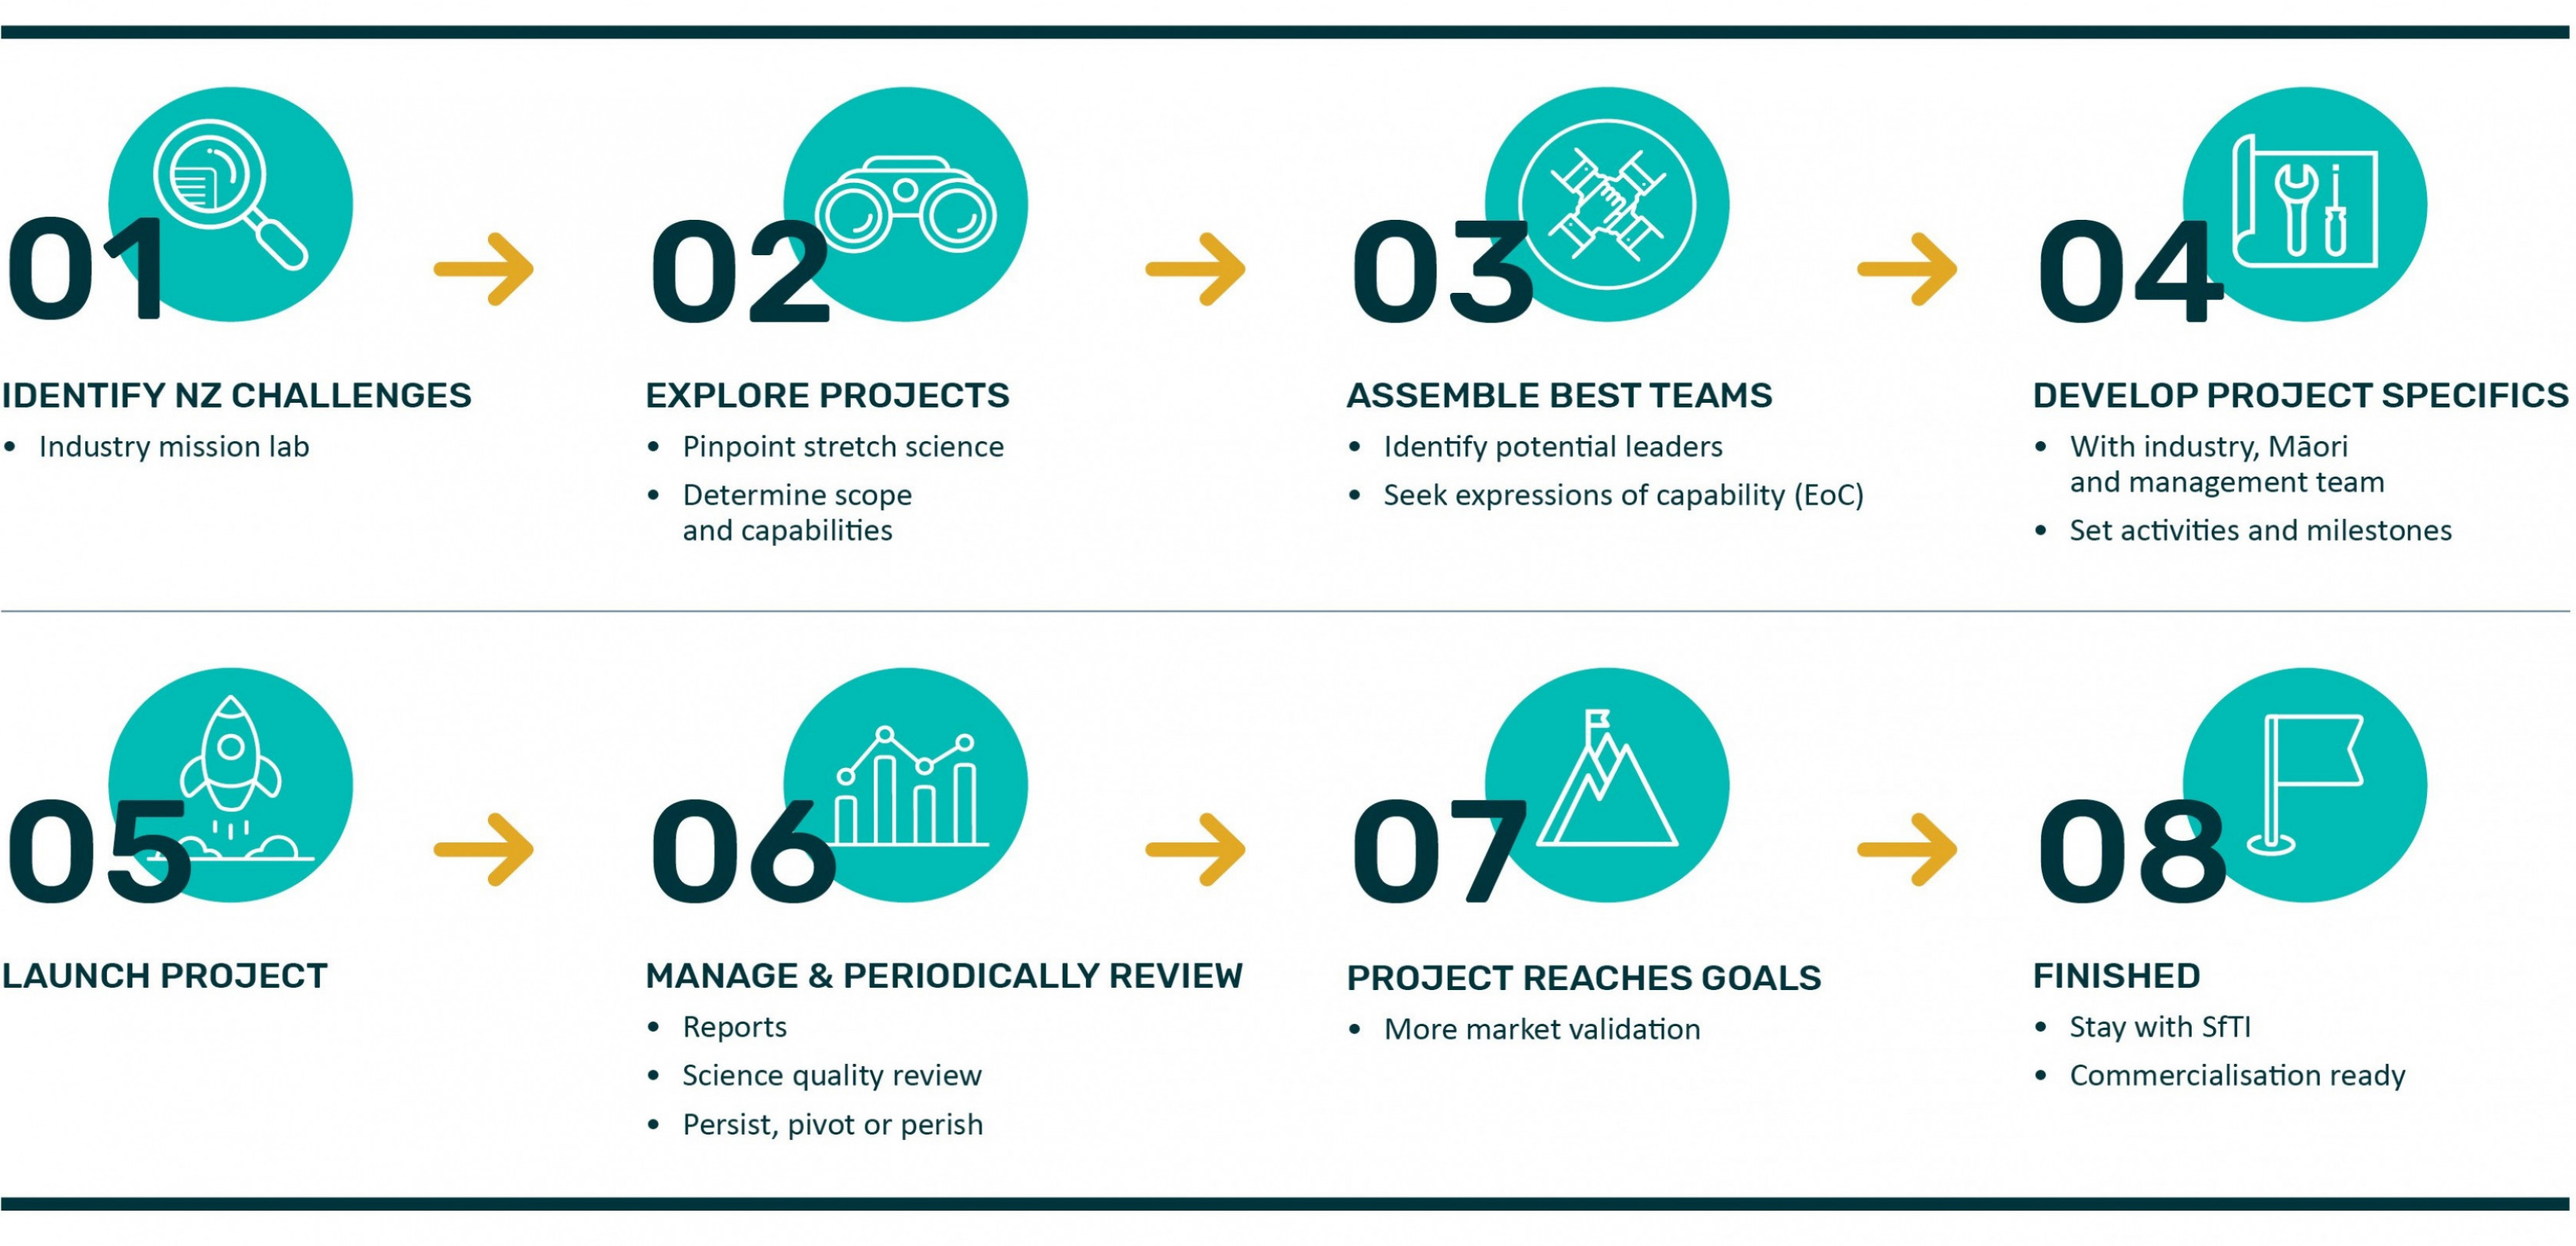 The infographic shows SfTI Spearhead project development process.